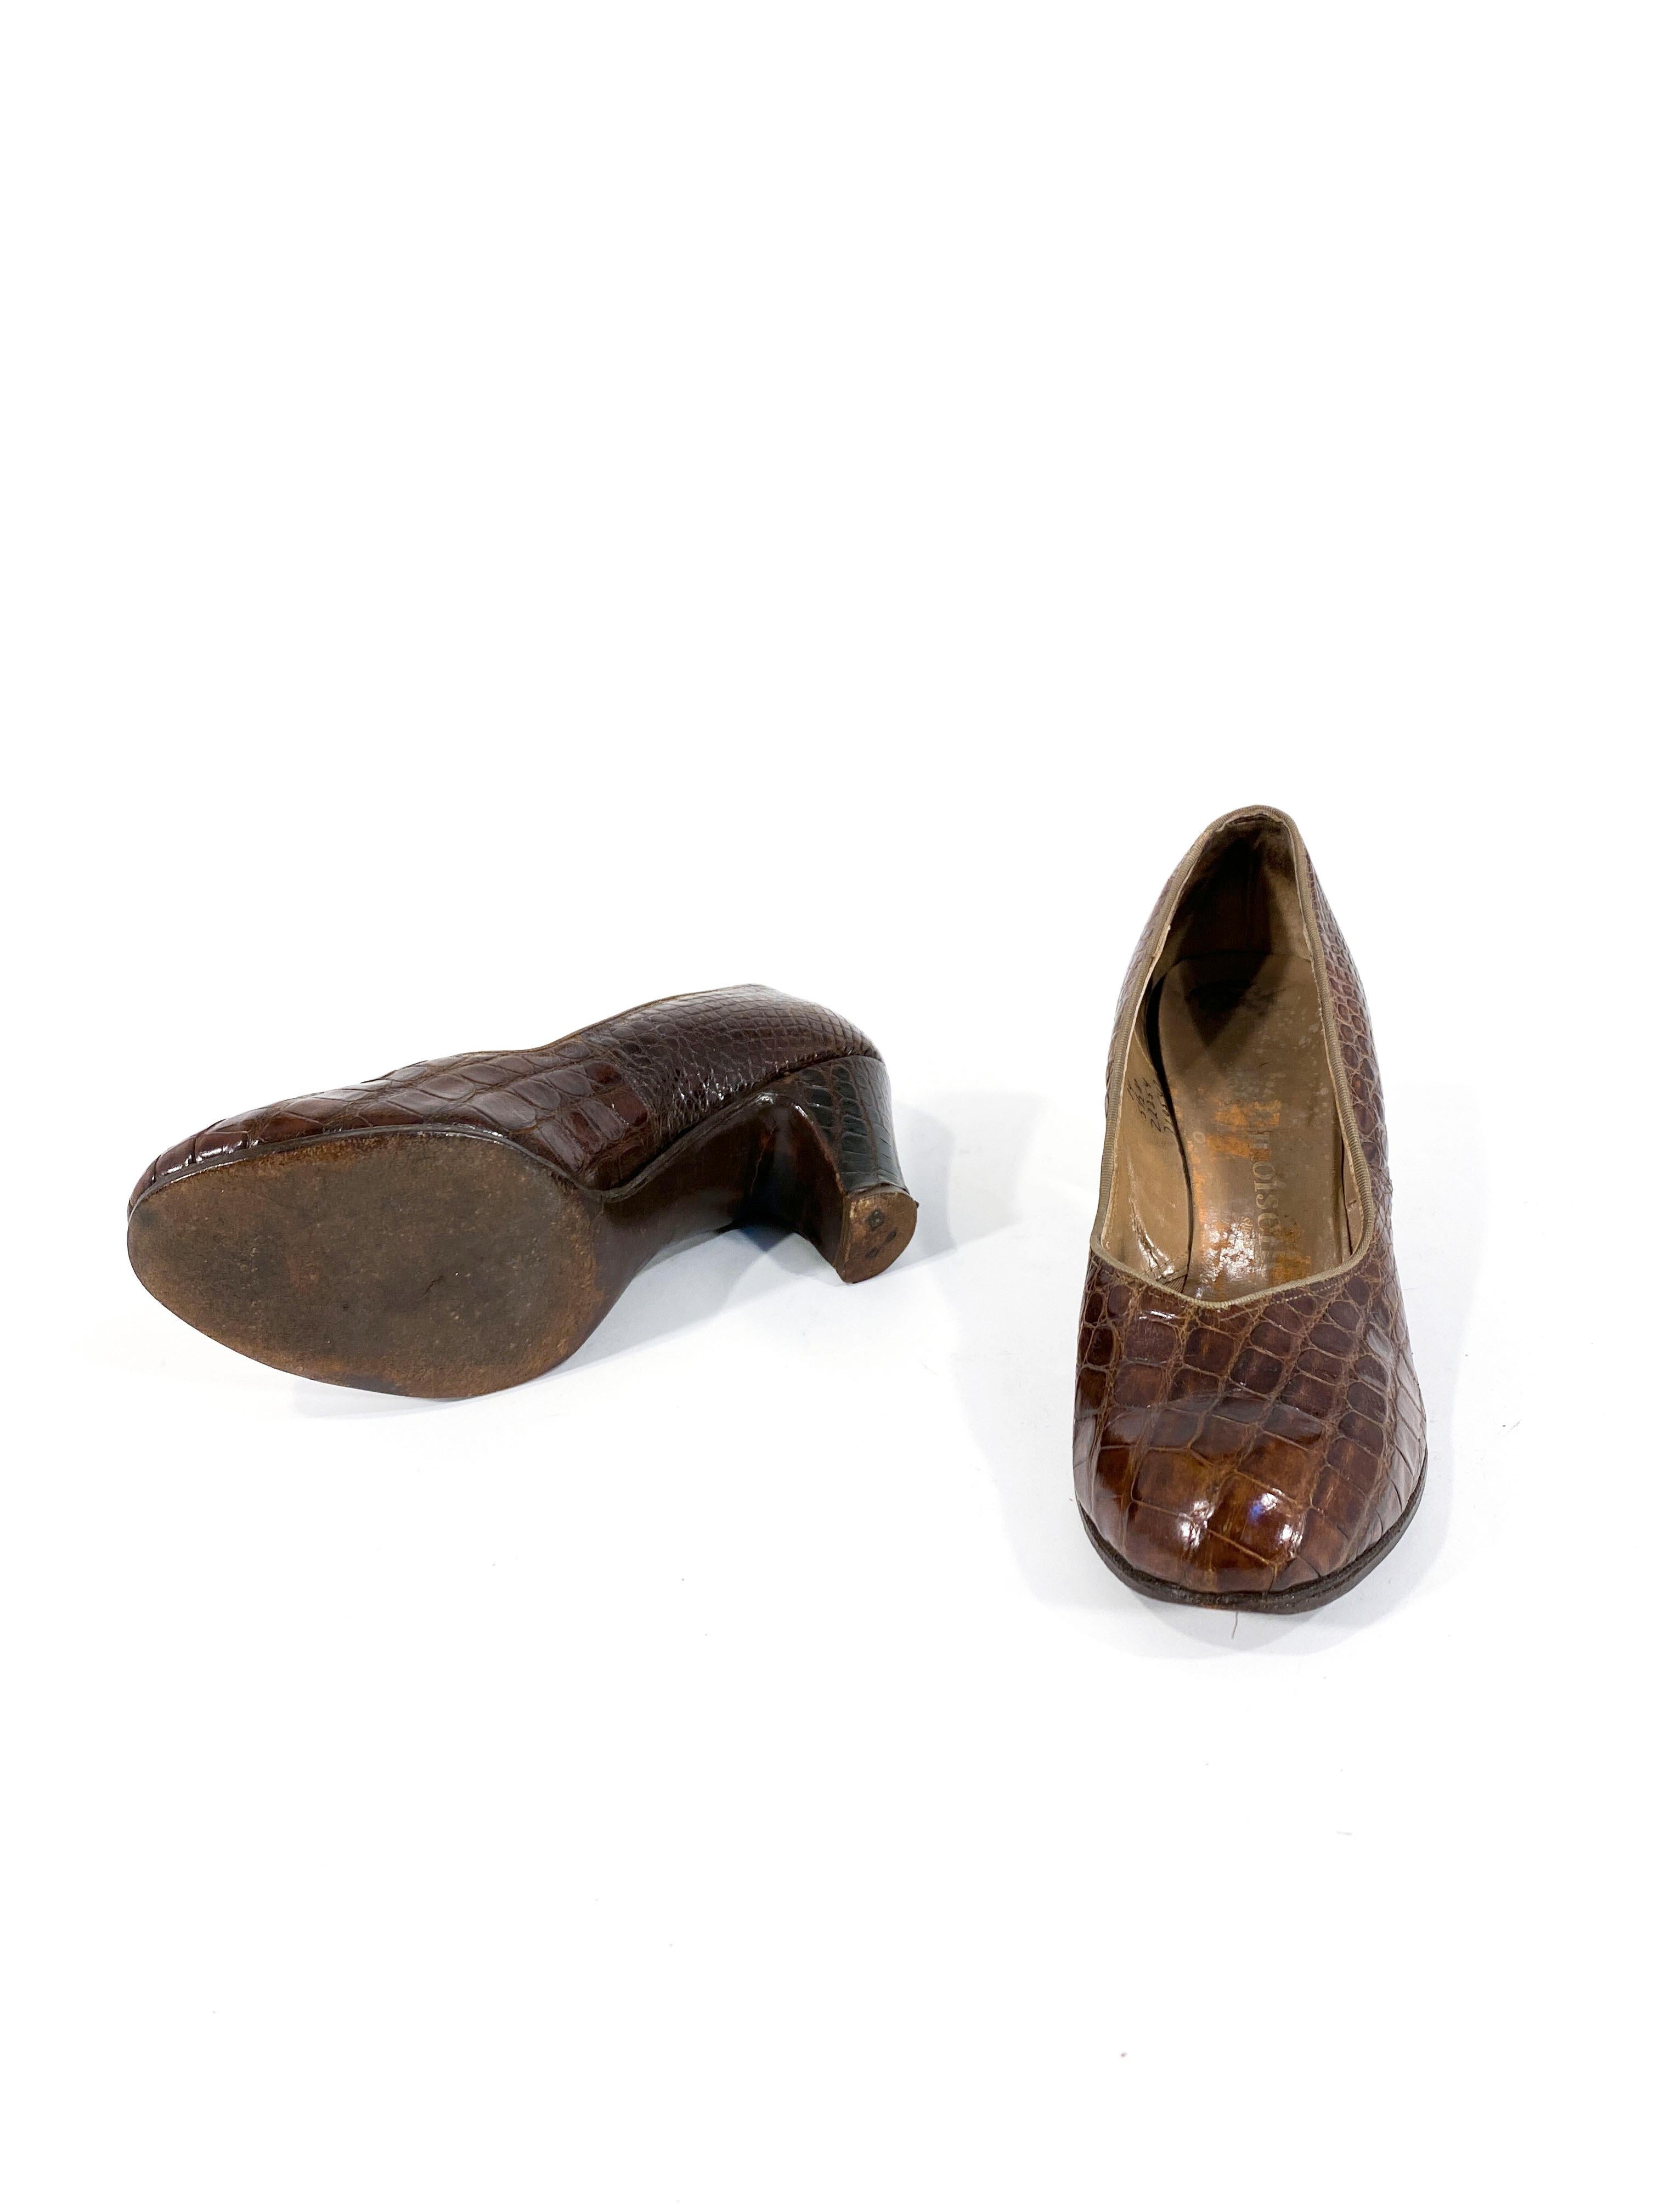 1940s Alligator Pumps In Good Condition For Sale In San Francisco, CA